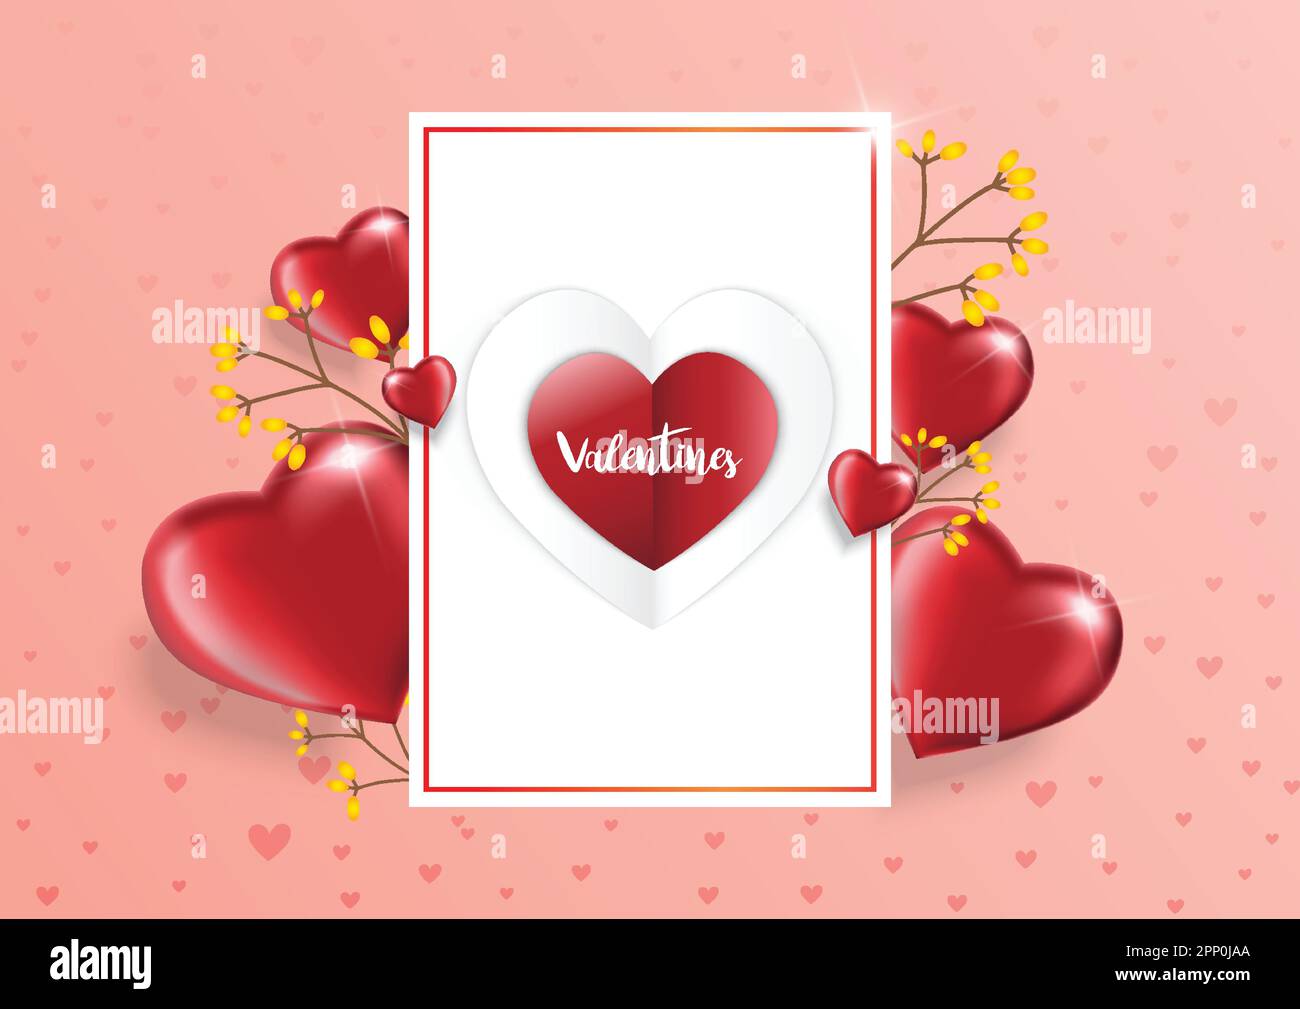 Valentines Day background with textbox and beautiful hearts balloons. Greeting card, invitation or banner template Stock Vector